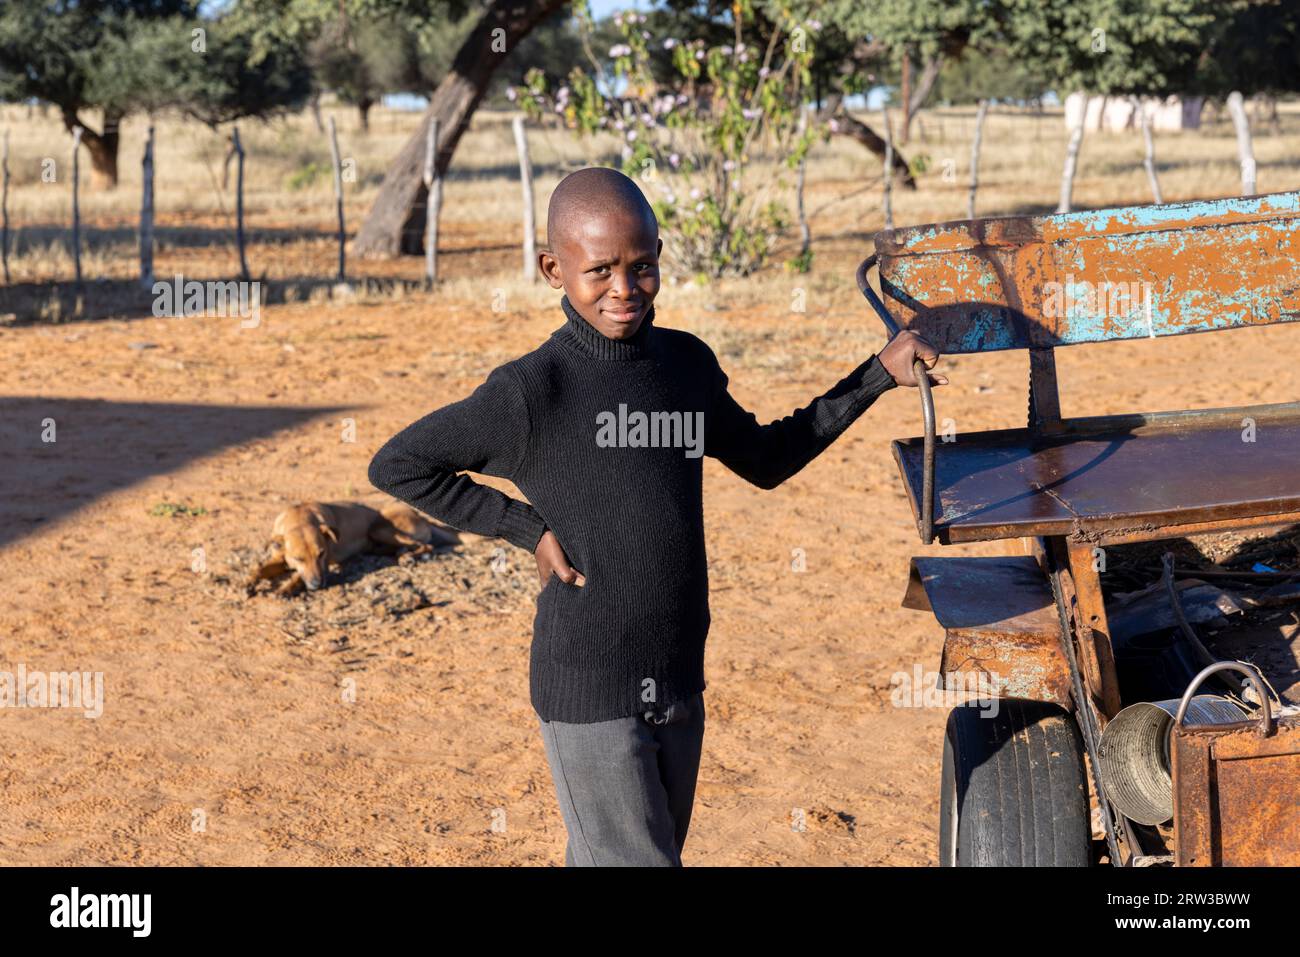 young village african child with bald head standing outdoors next to a donkey cart Stock Photo